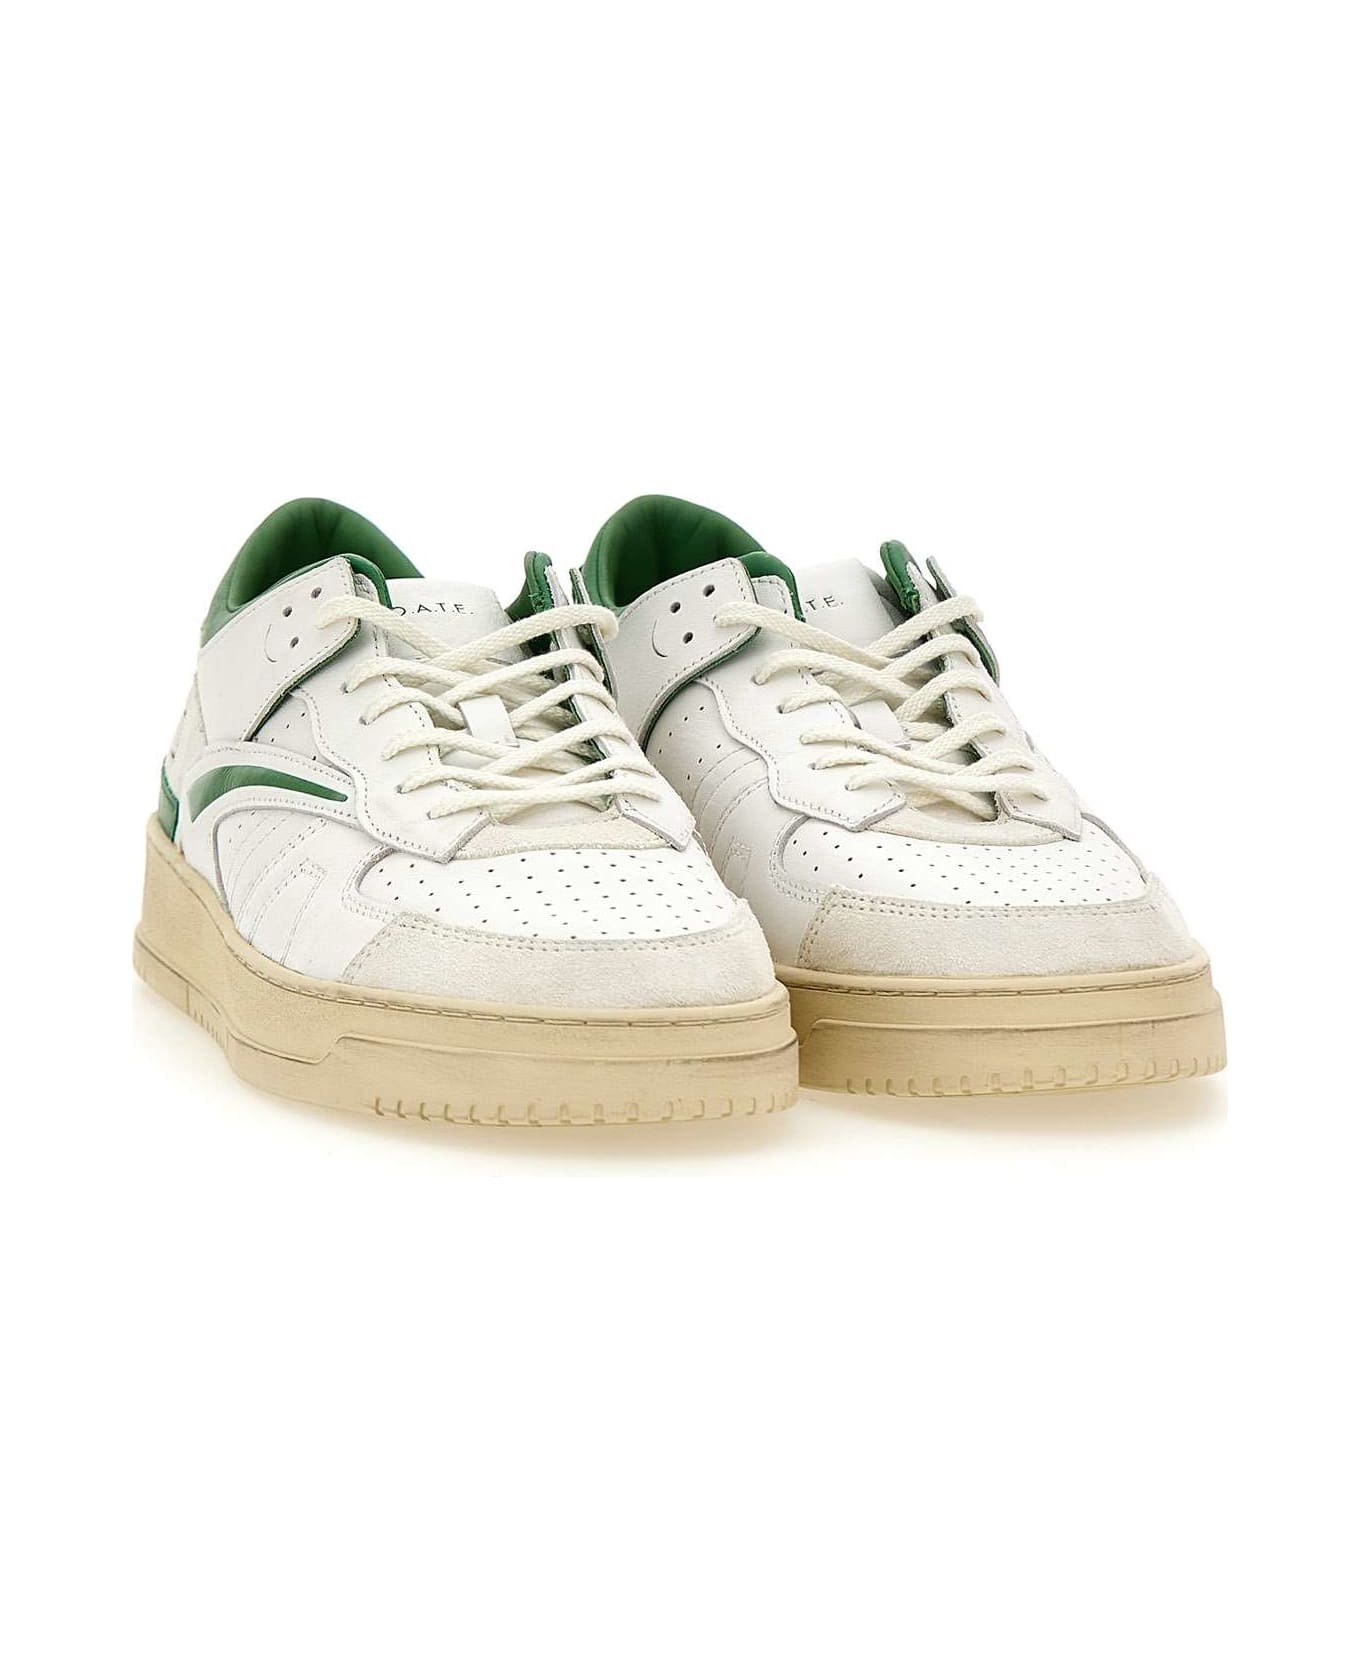 D.A.T.E. "torneo" Leather Sneakers - WHITE スニーカー